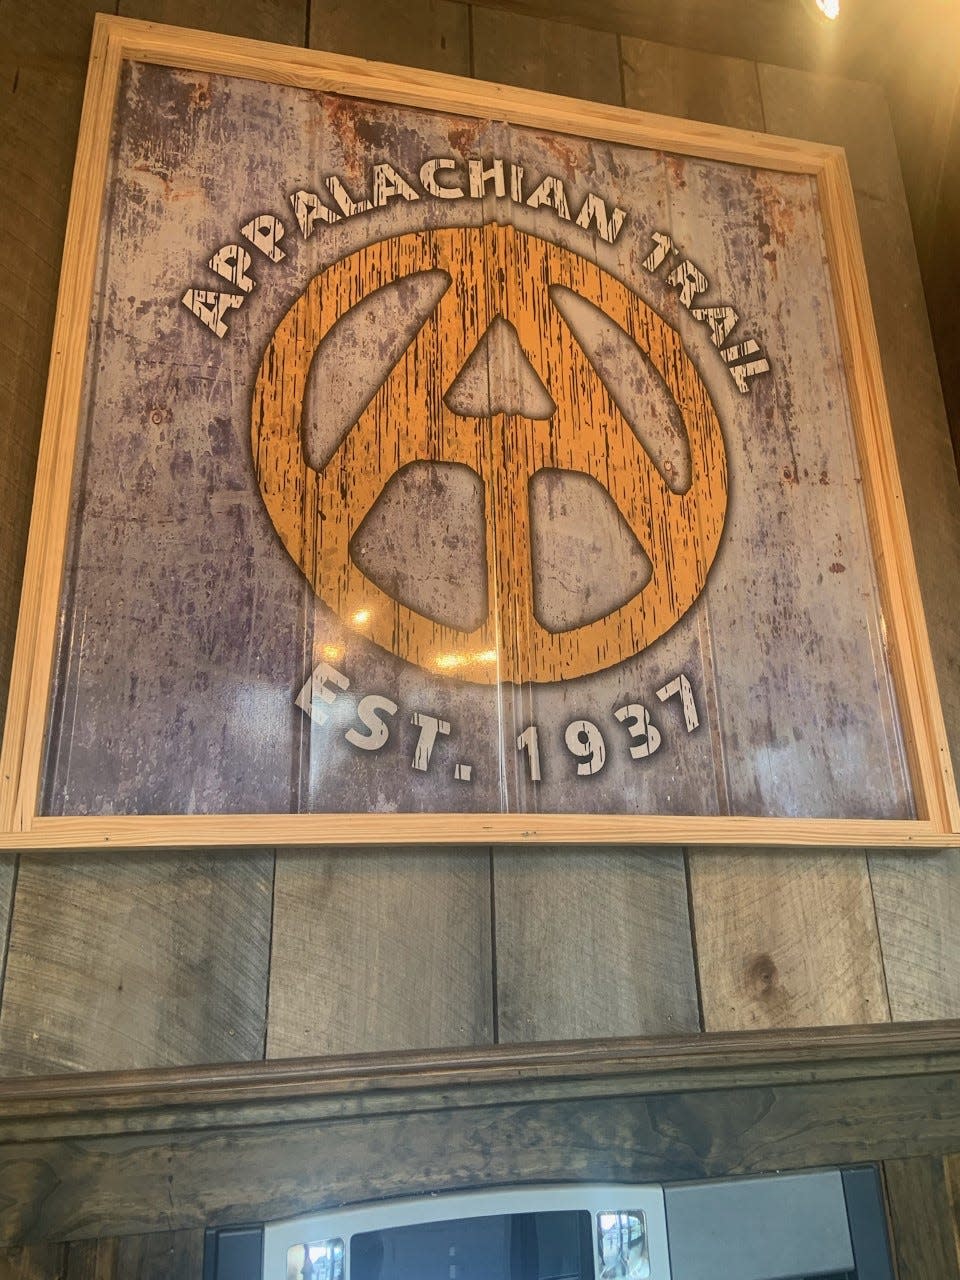 Vinyl Pies Pizza's motto, "Worth the Hike" pays homage to the town's Appalachian Trail connection.